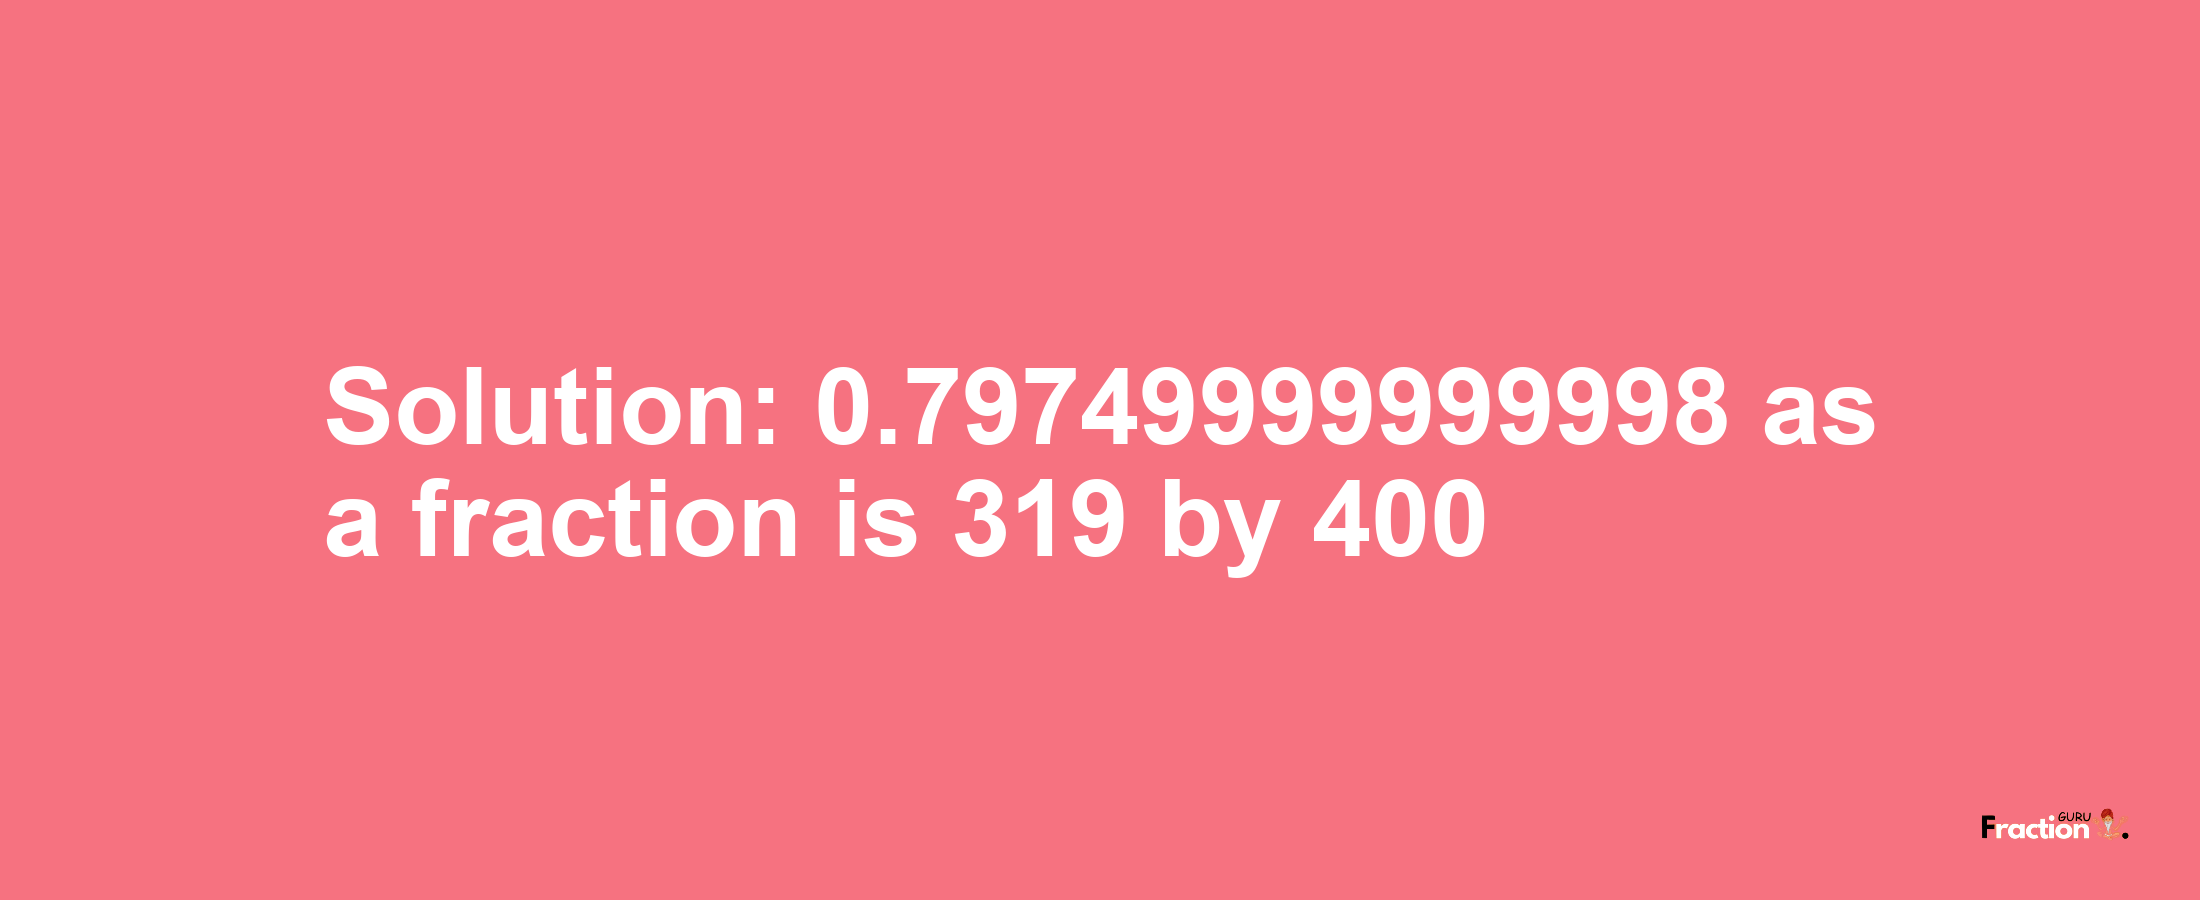 Solution:0.79749999999998 as a fraction is 319/400